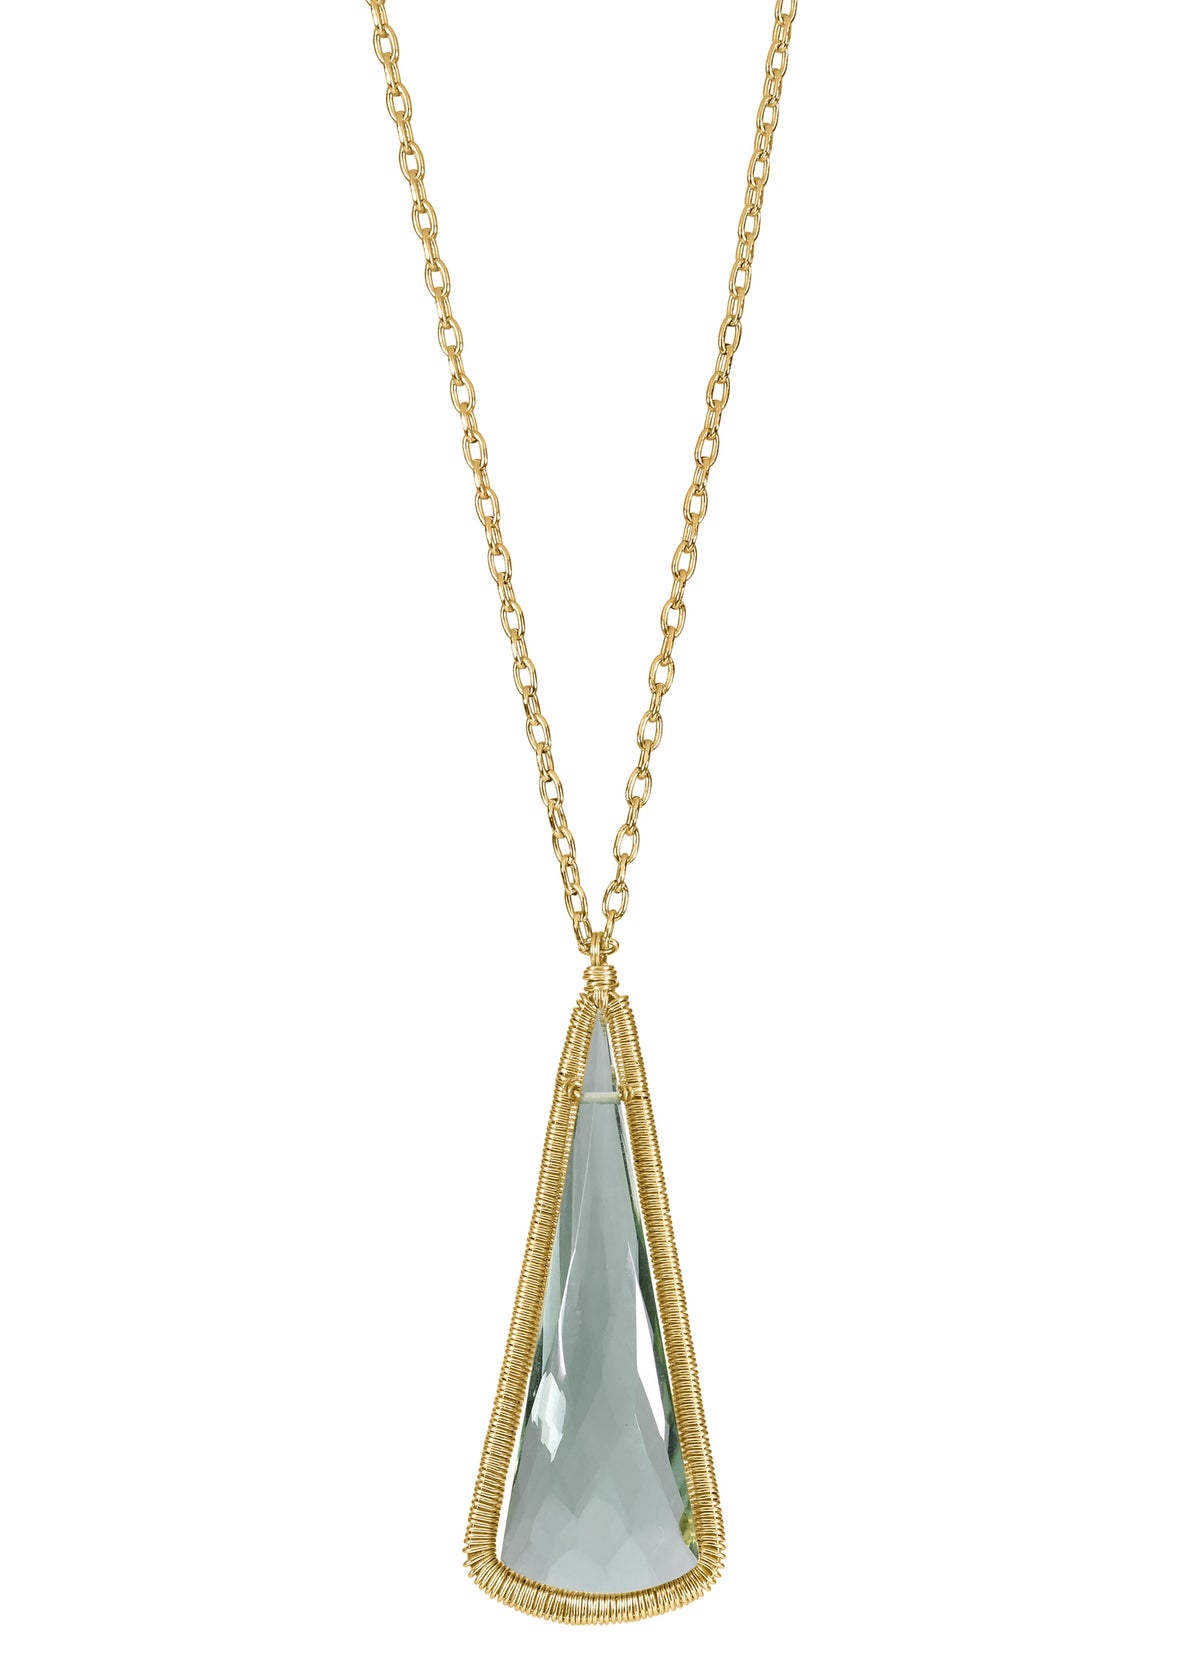 Green quartz 14k gold fill Necklace measures 30&quot; in length Pendant measures 1-1/2&quot; in length and 5/8&quot; in width at the widest point Handmade in our Los Angeles studio